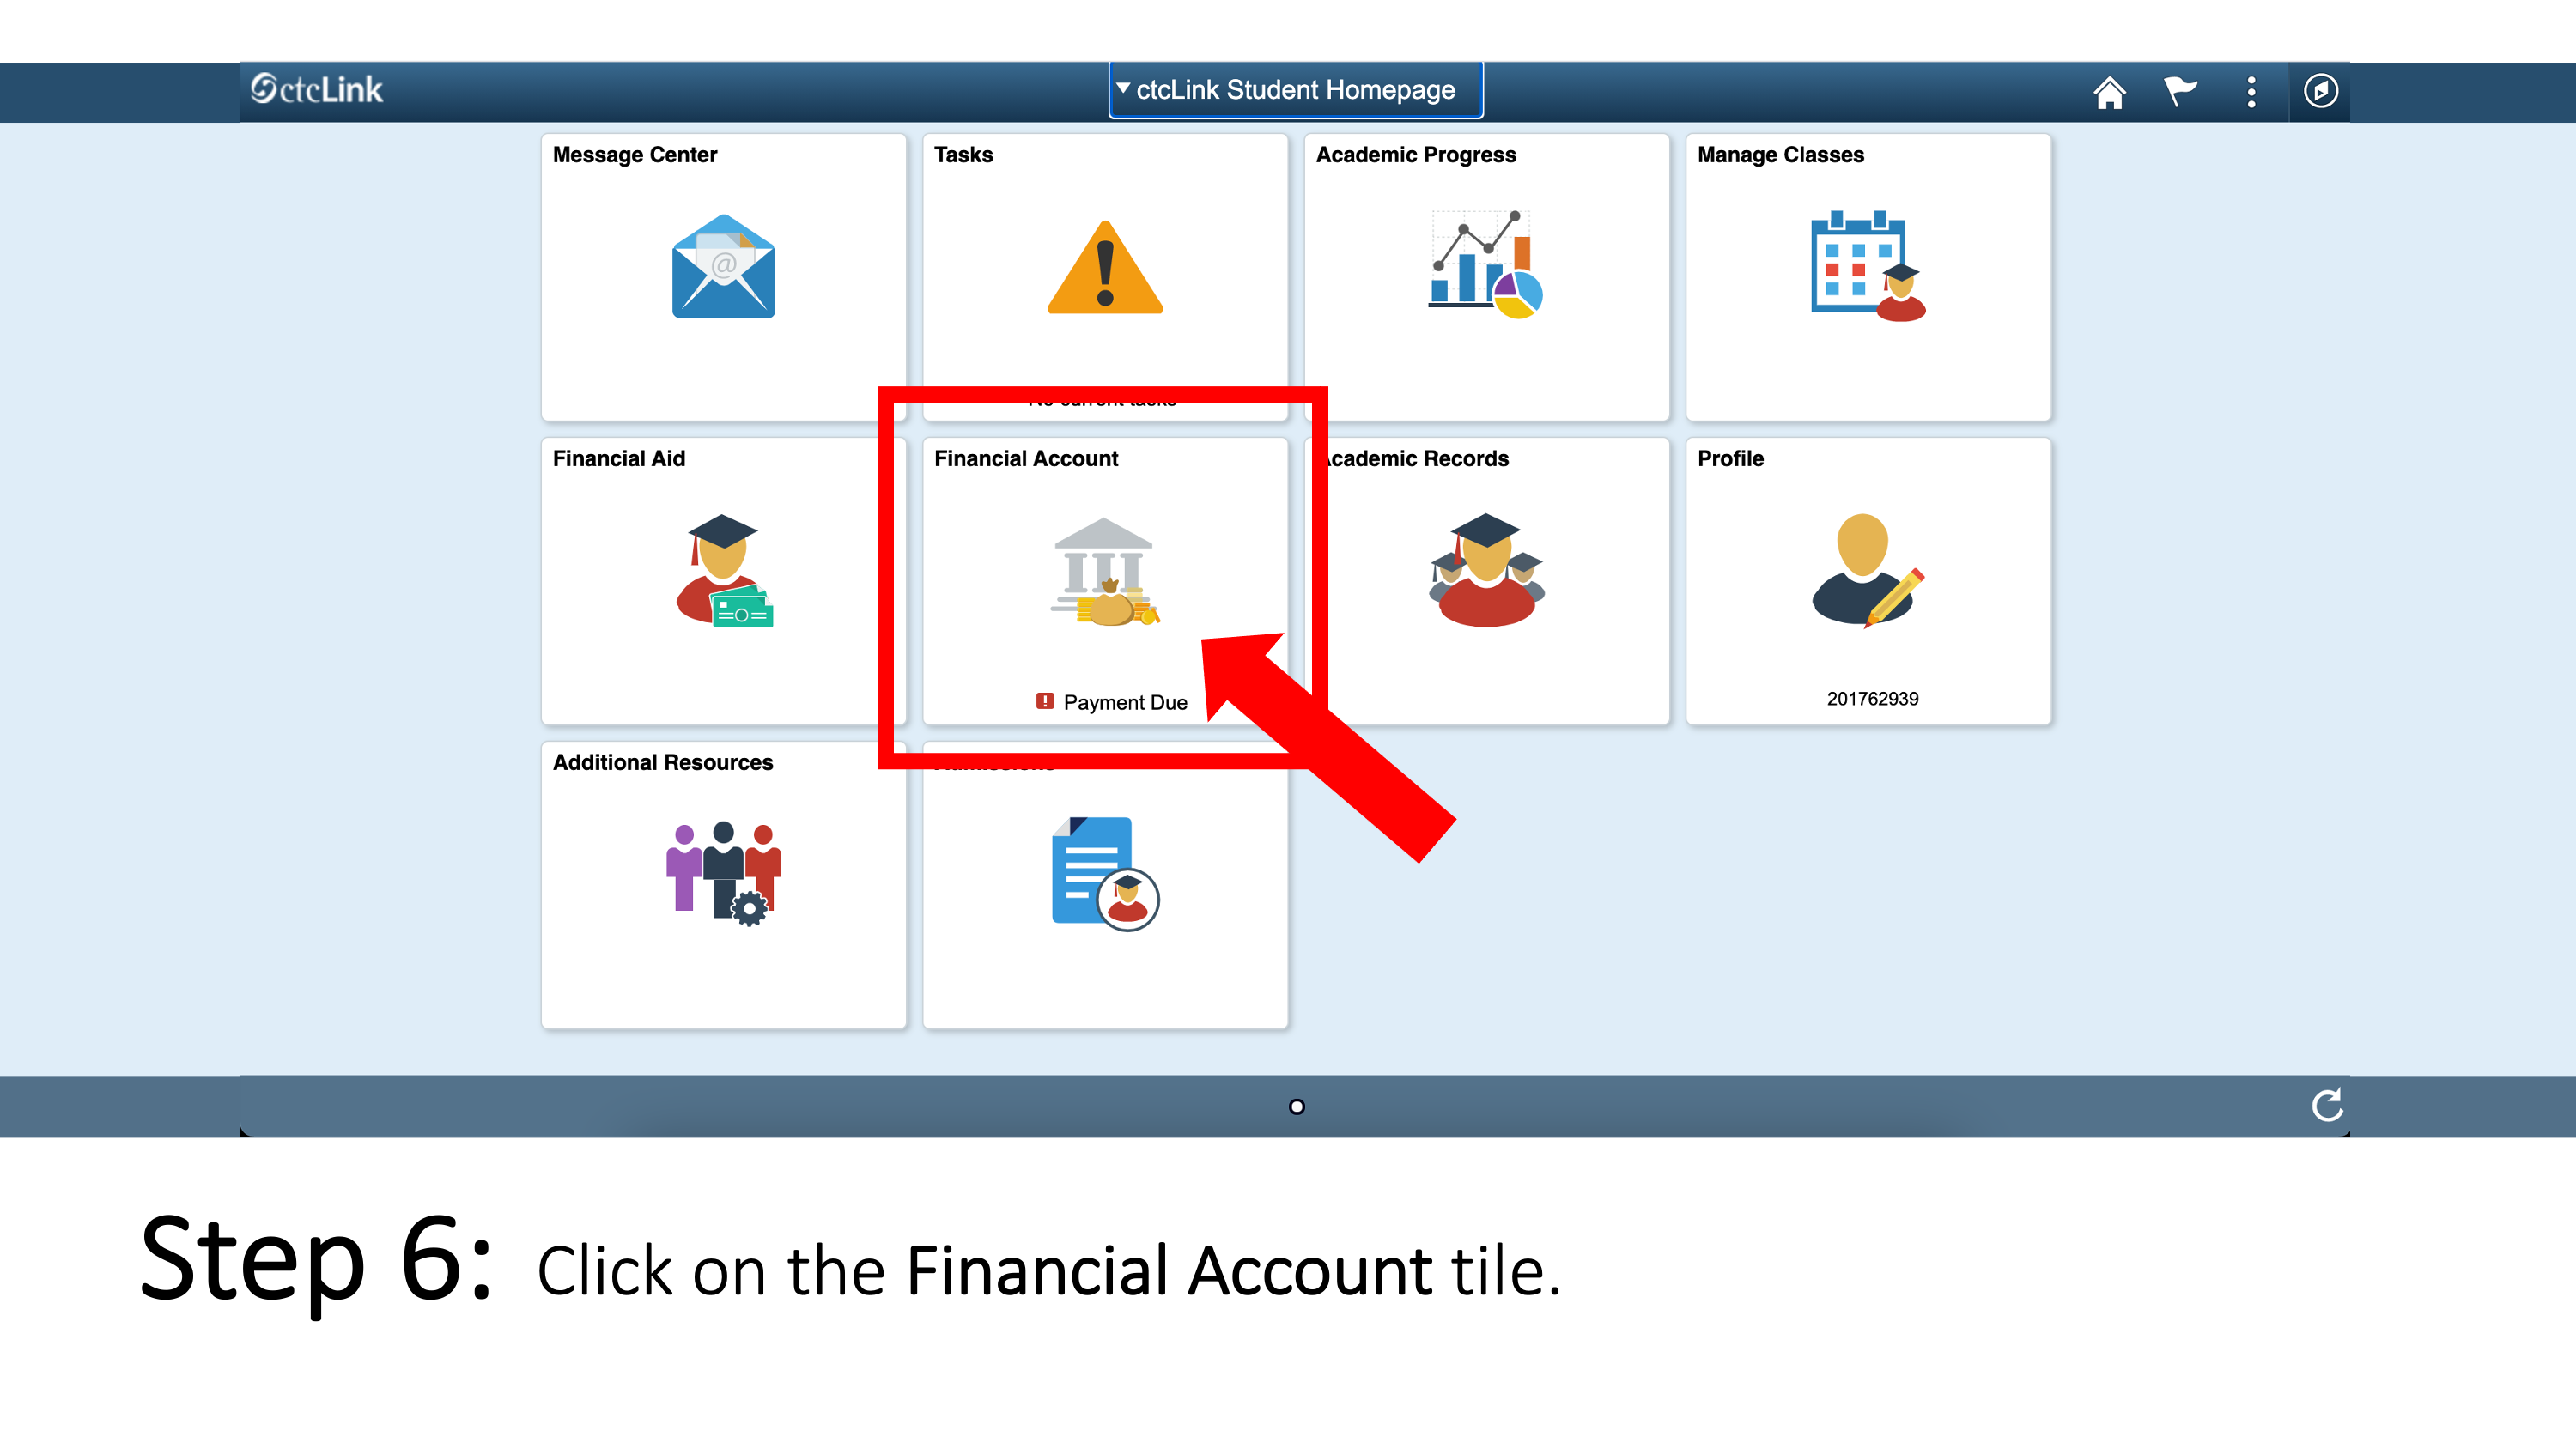 Click on Financial Account tile